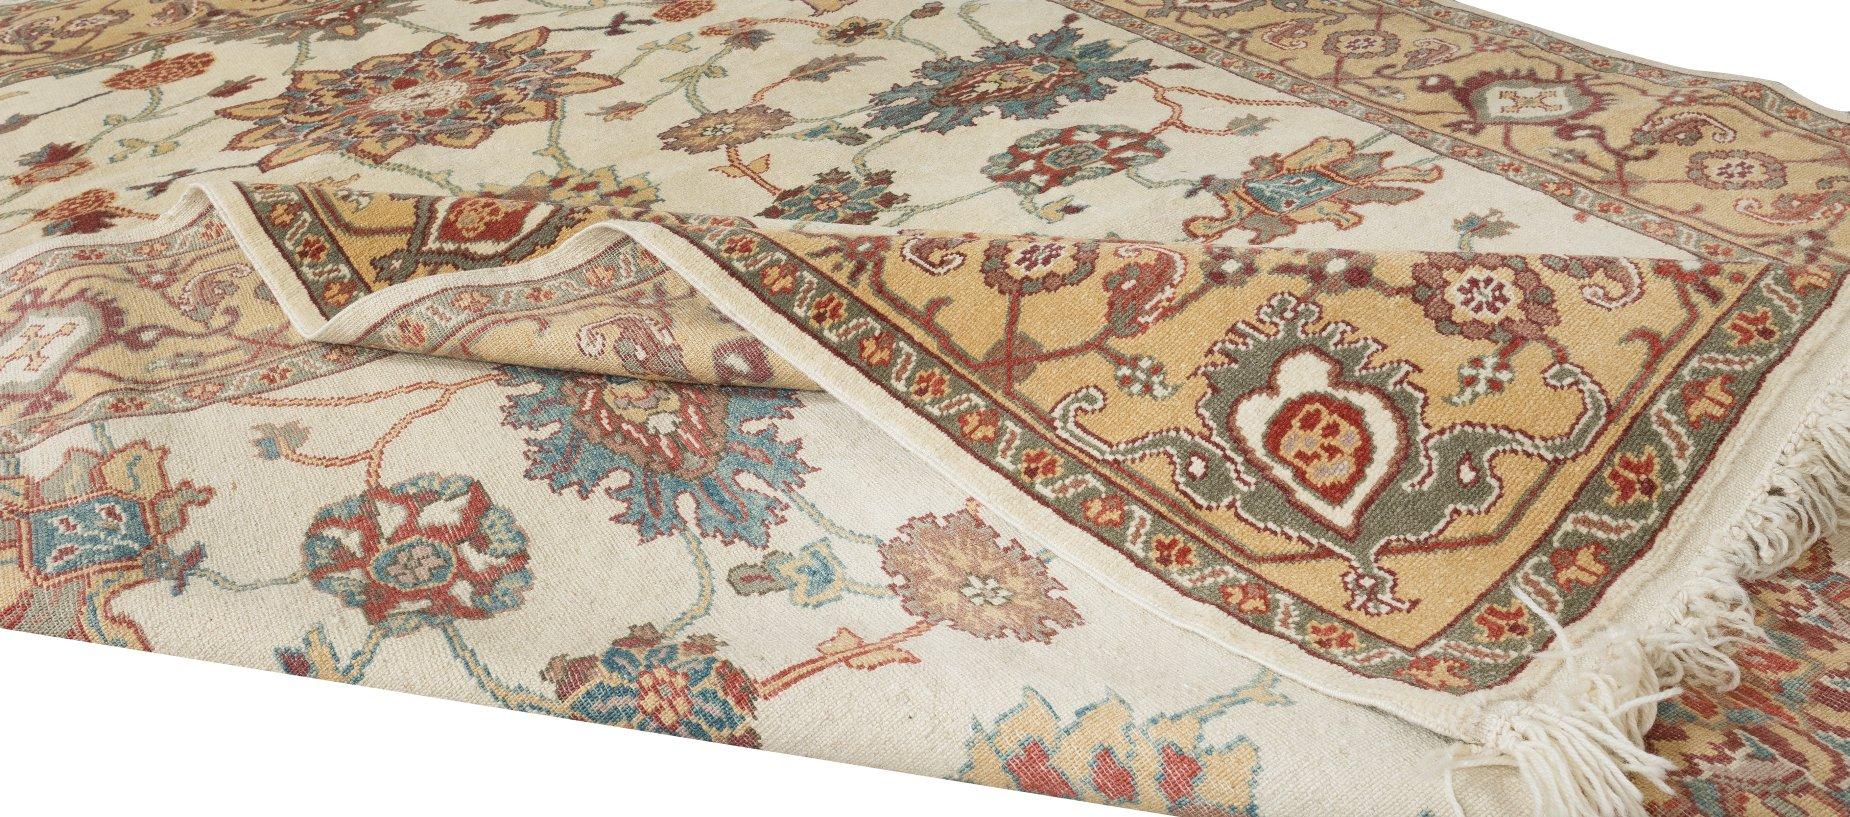 Modern 5.7x7.9 Ft Hand Knotted Turkish Floral Rug, Vintage Authentic Oushak Wool Carpet For Sale